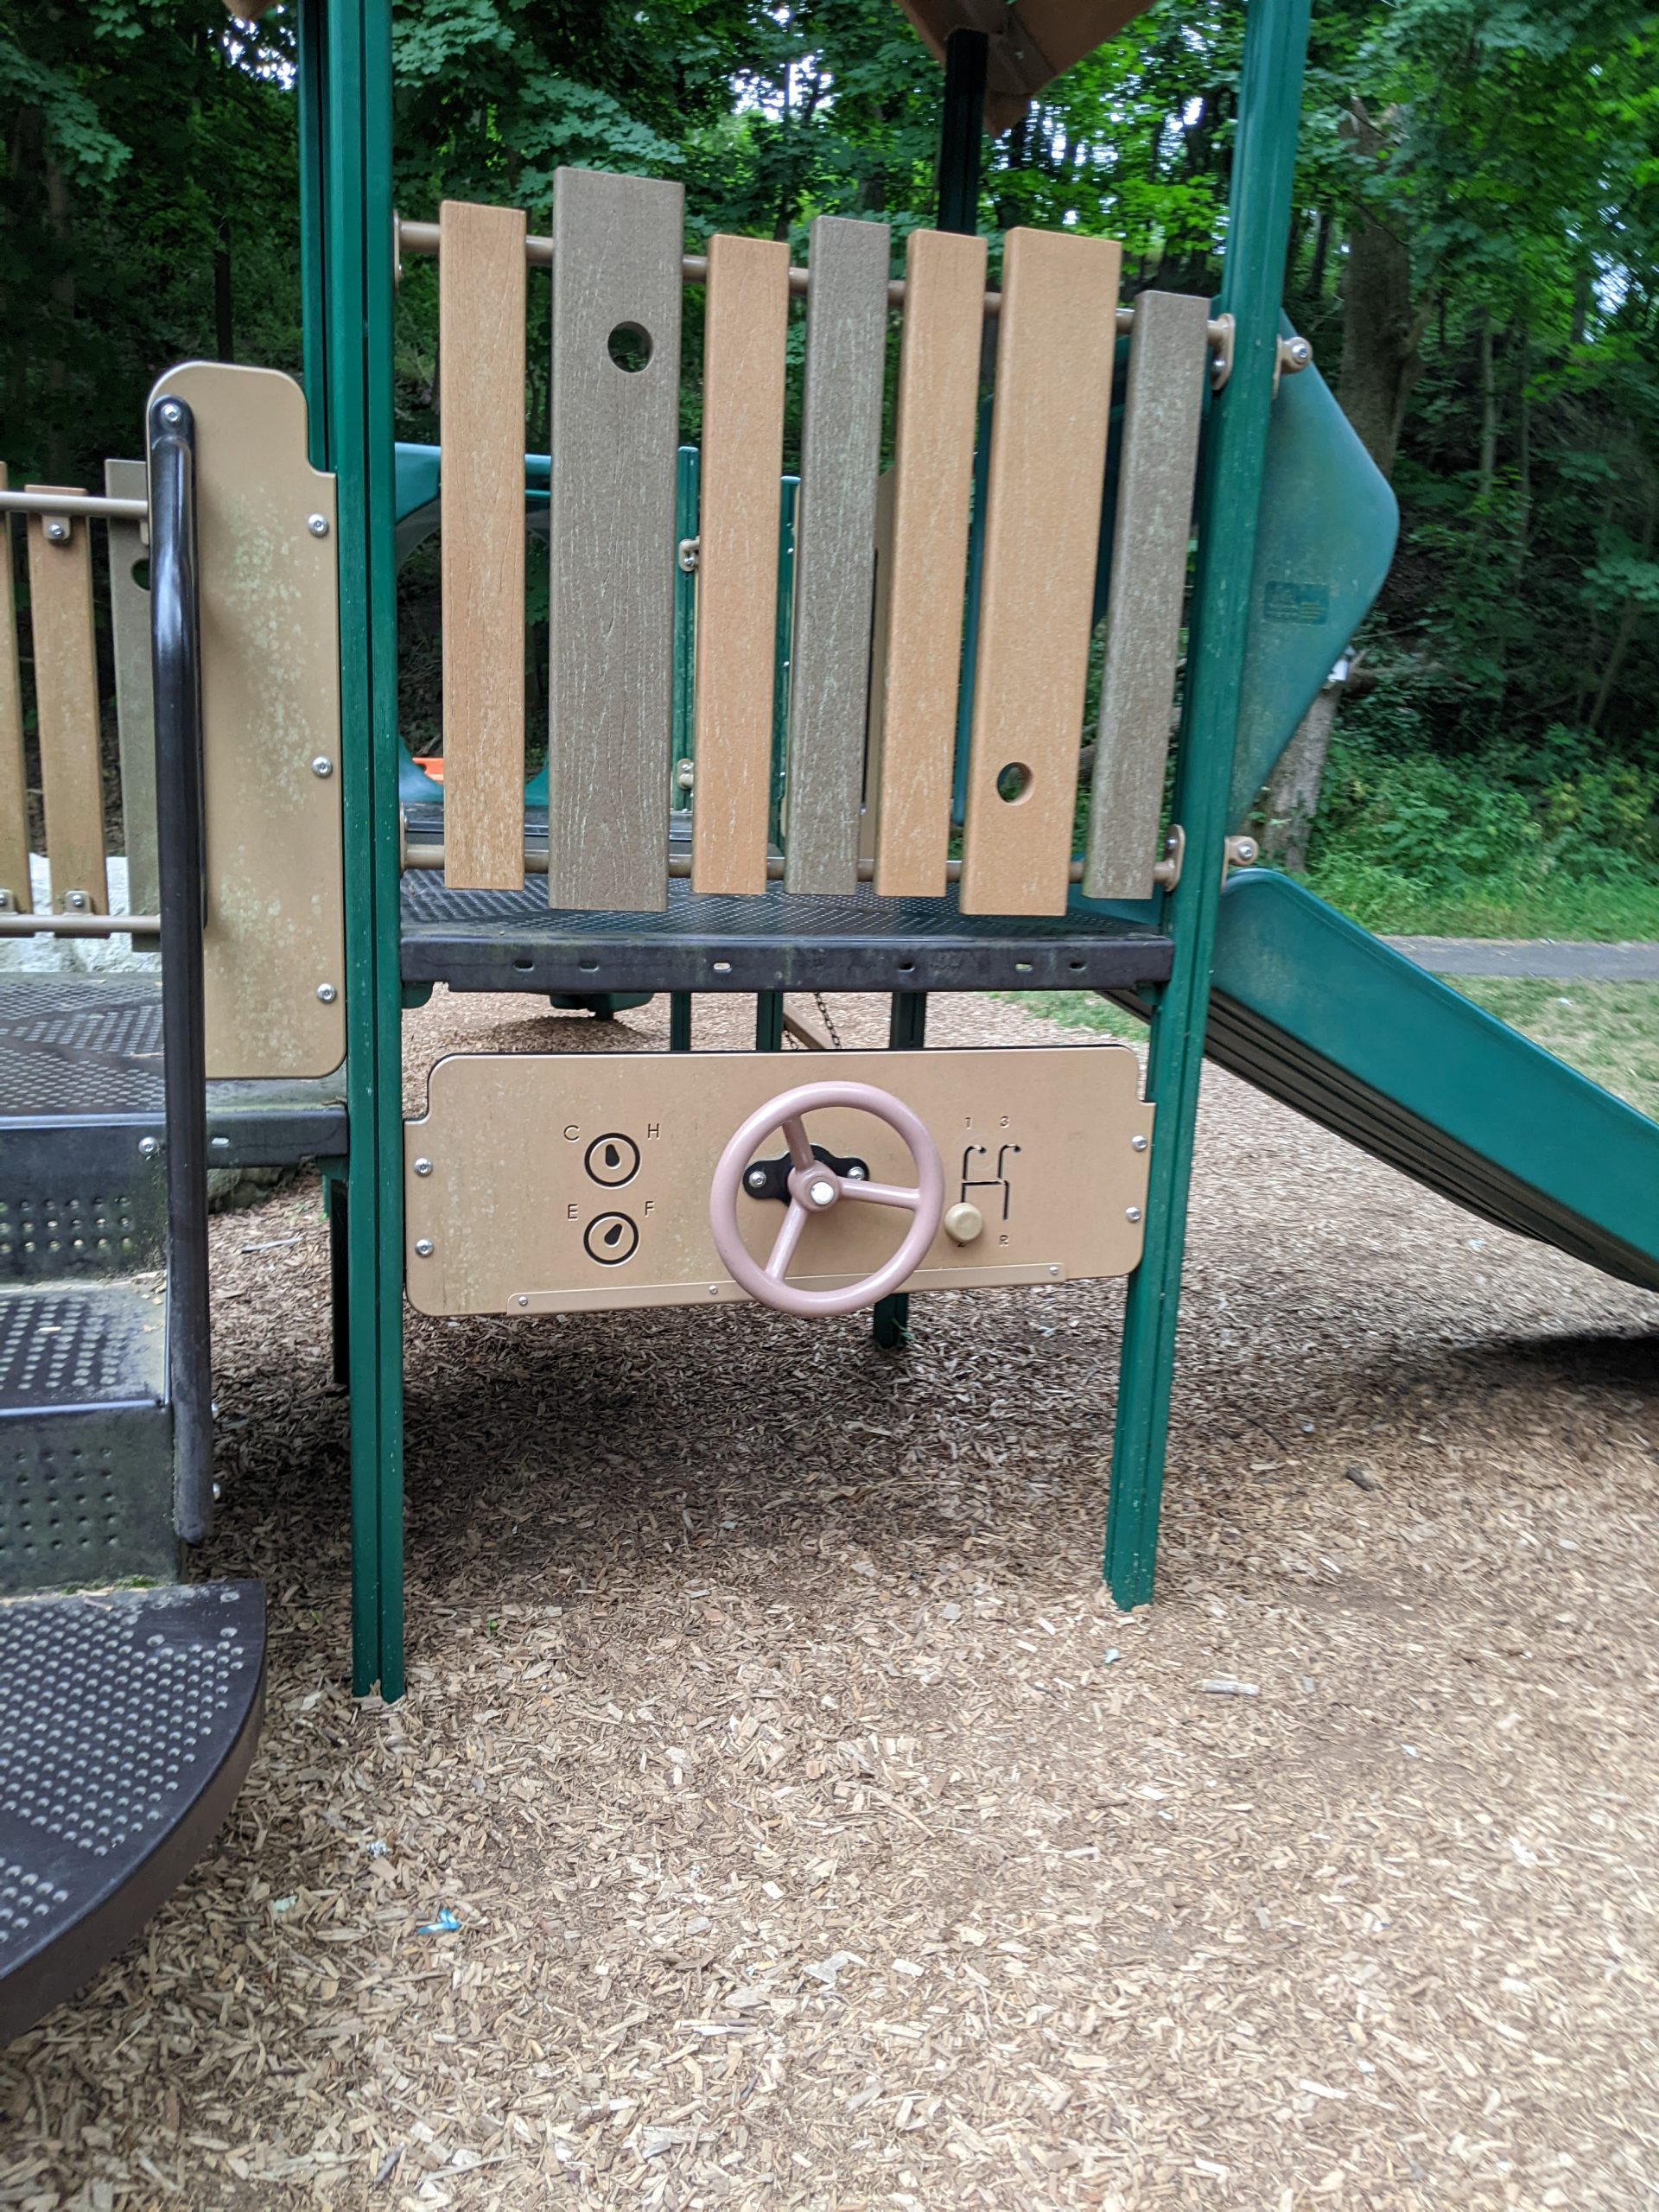 Frenchtown Boro Park Playground in Frenchtown, NJ Accessible SteeringWheel